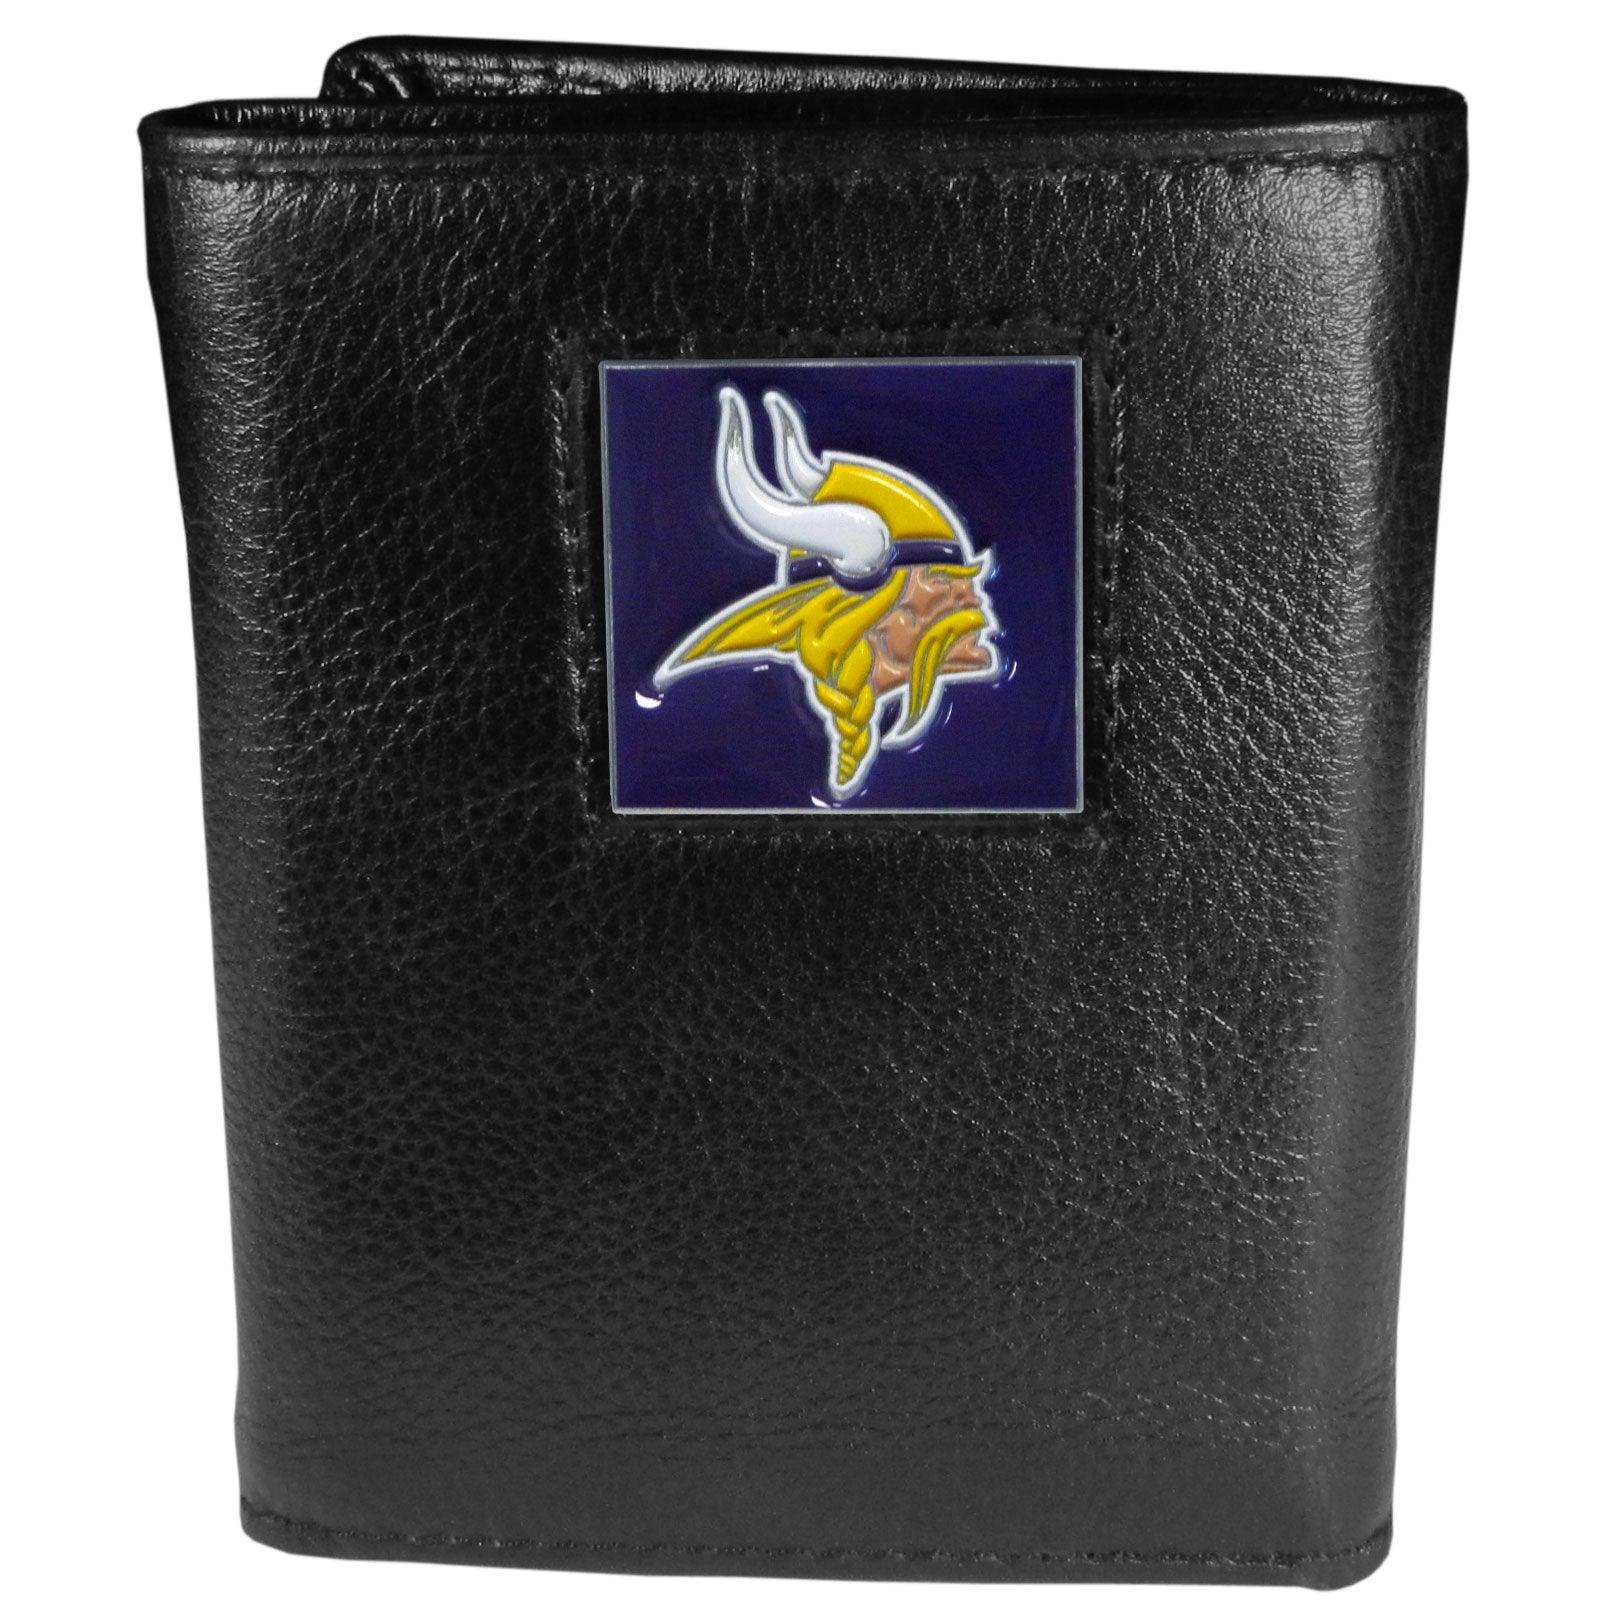 Minnesota Vikings Deluxe Leather Tri-fold Wallet Packaged in Gift Box - Flyclothing LLC